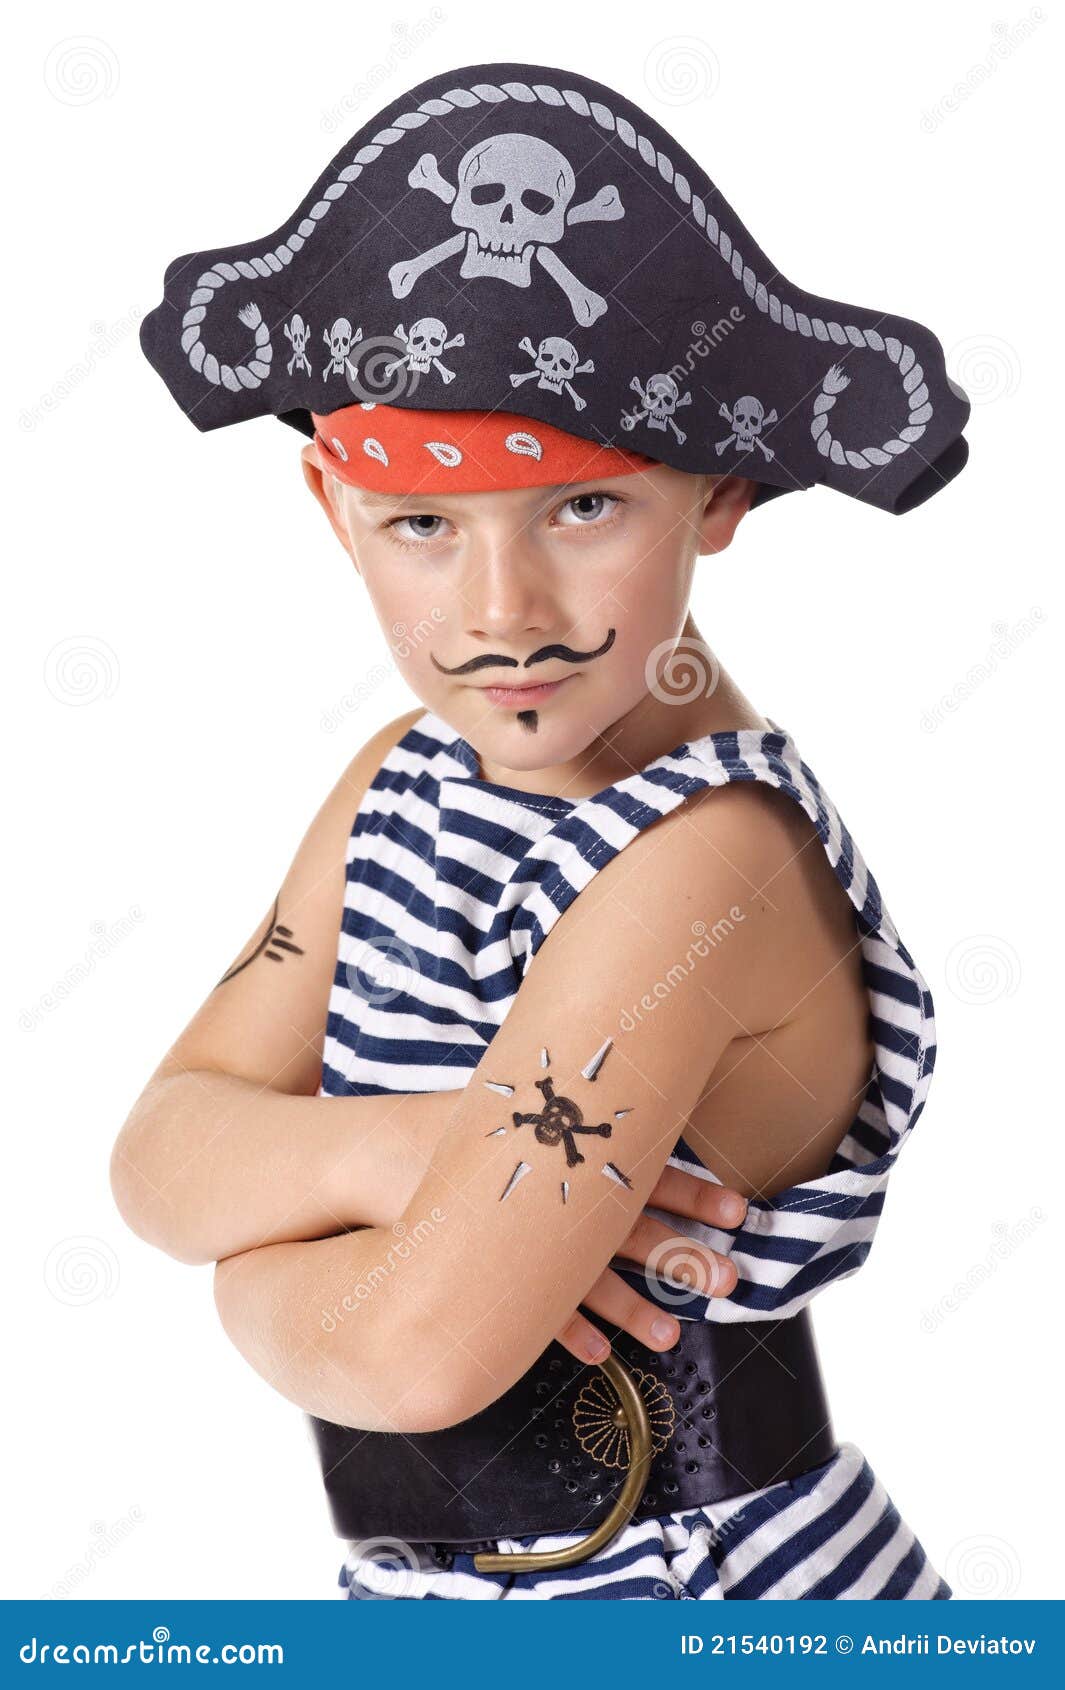 the kid wearing in pirate costume